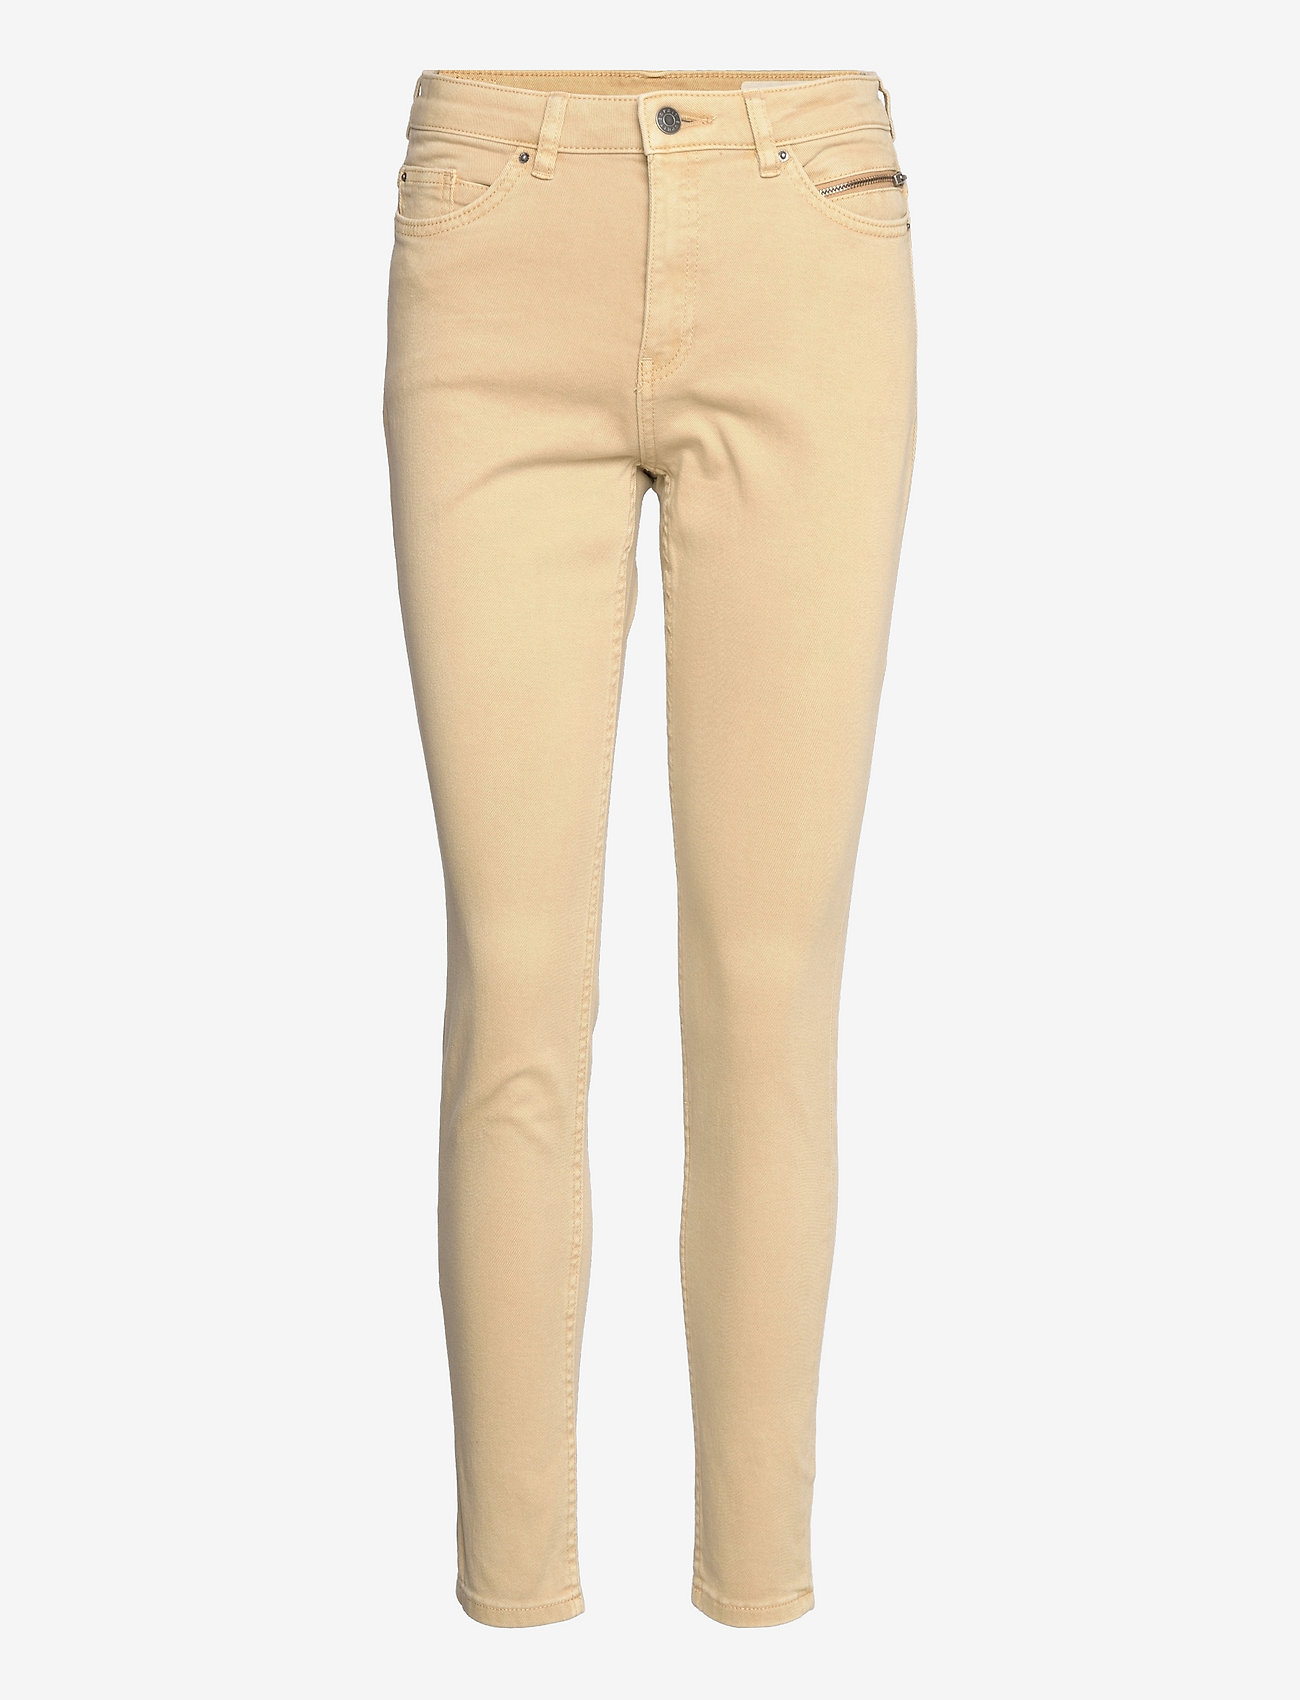 Esprit Casual - Stretch trousers with zip detail - slim fit jeans - sand - 0